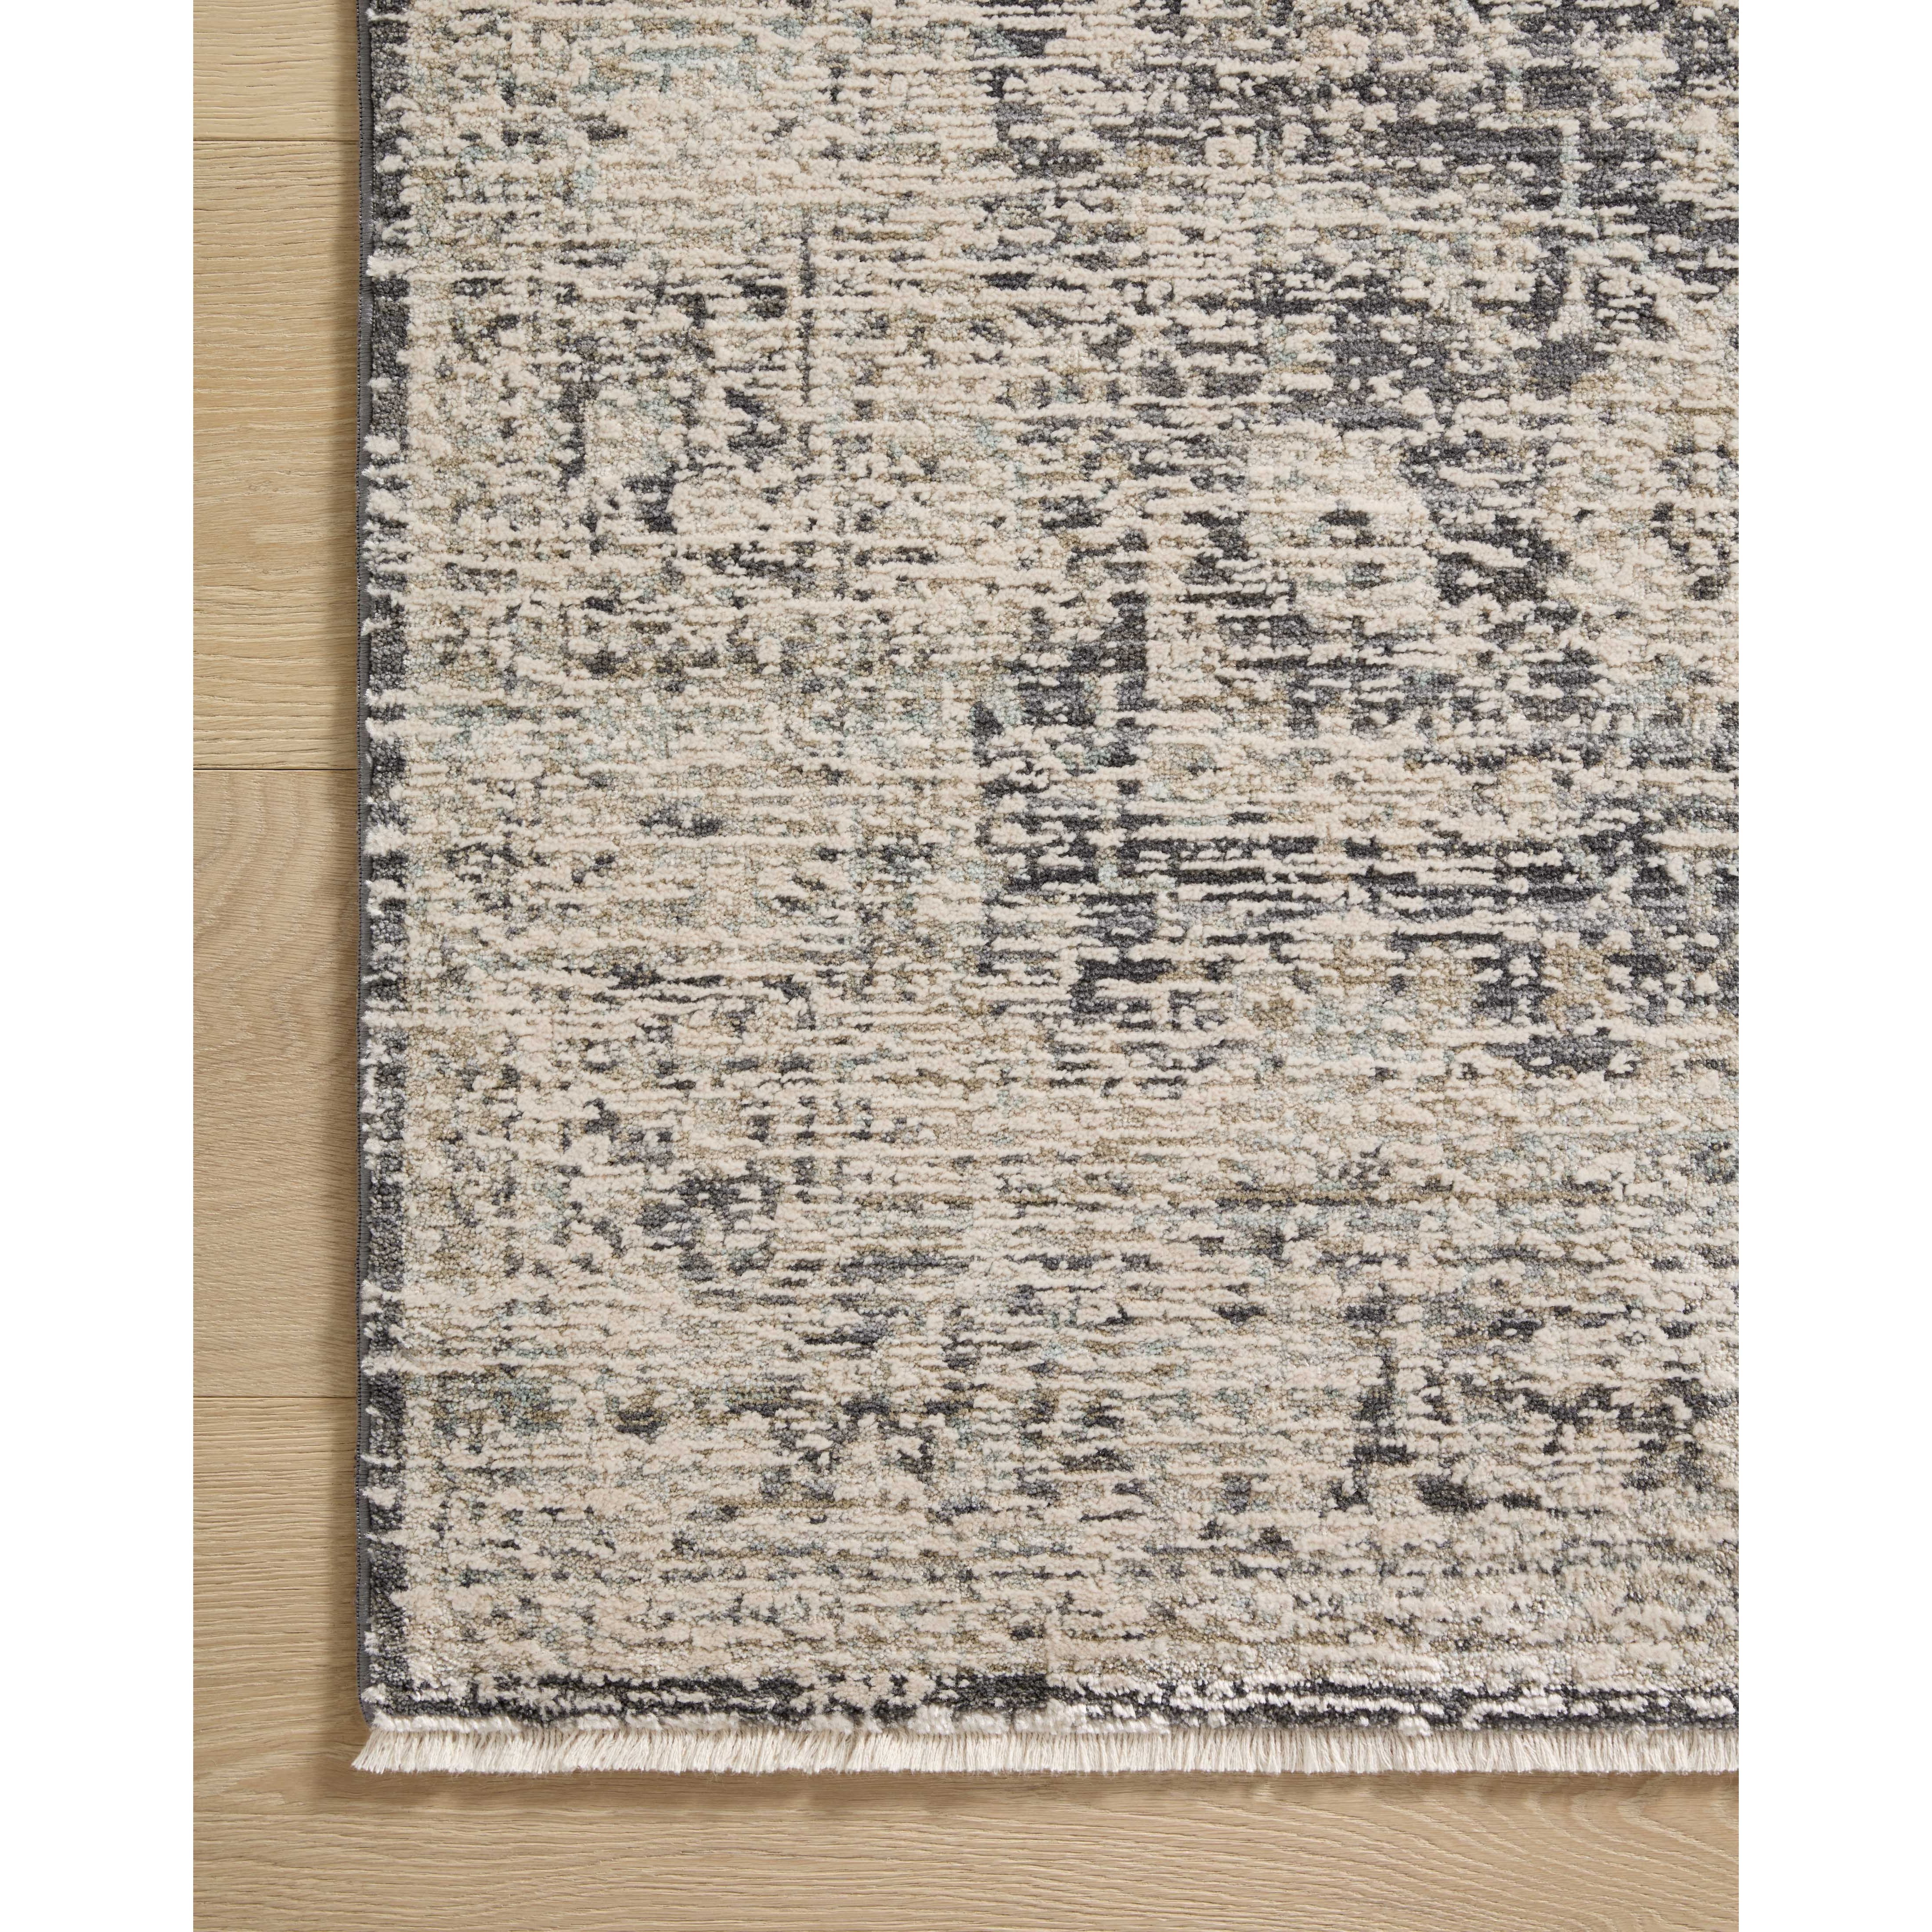 Amber Lewis x Loloi Alie Charcoal / Beige Rug have an elevated antique look and plush, modern feel. The rug’s underlying traditional motif is overlaid with a slightly higher pile that creates a softening effect like early morning fog. Amethyst Home provides interior design services, furniture, rugs, and lighting in the Austin metro area.